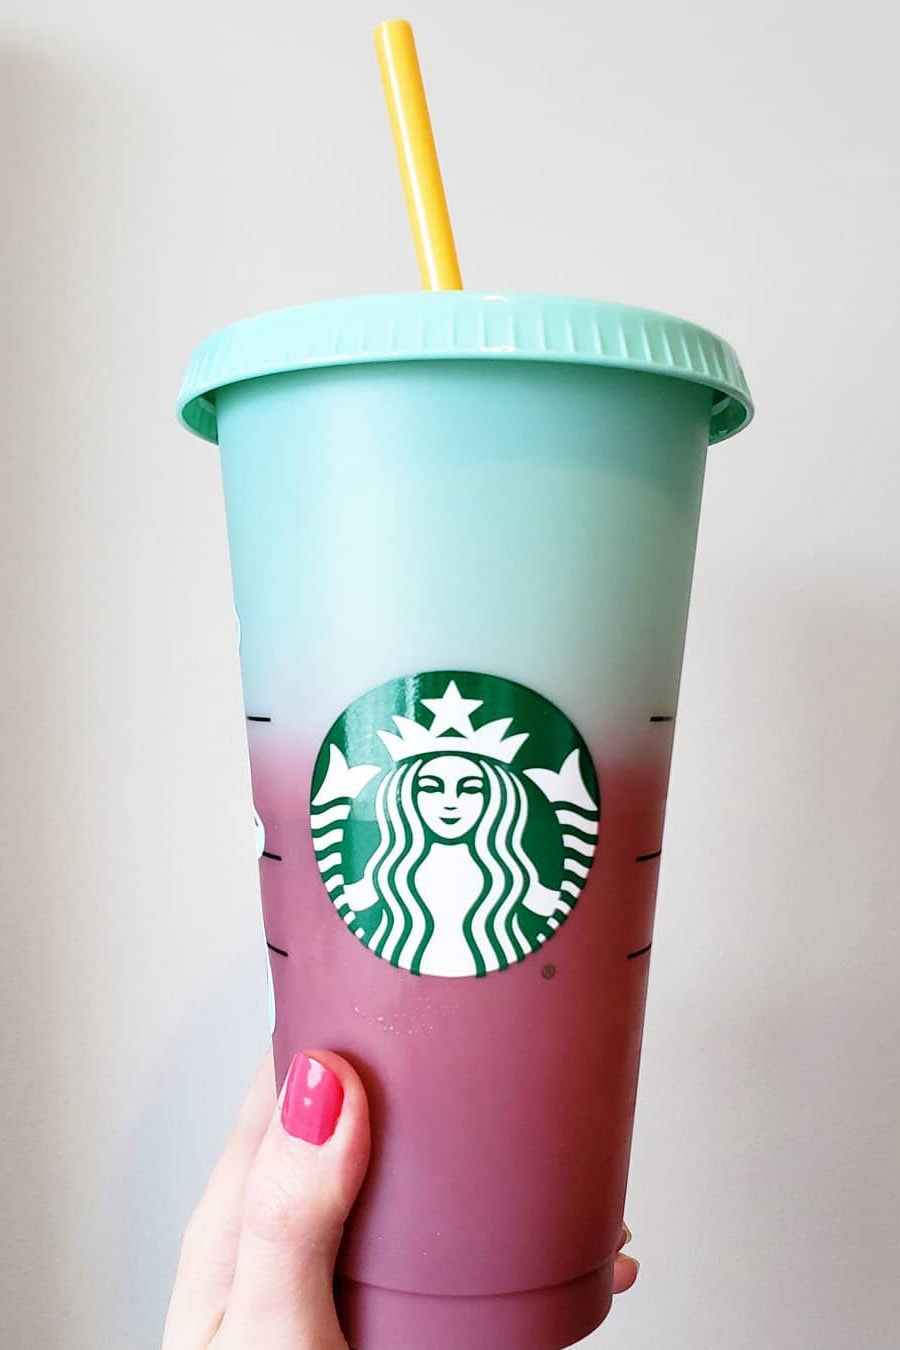 Color Changing Cup - Yellow to Green